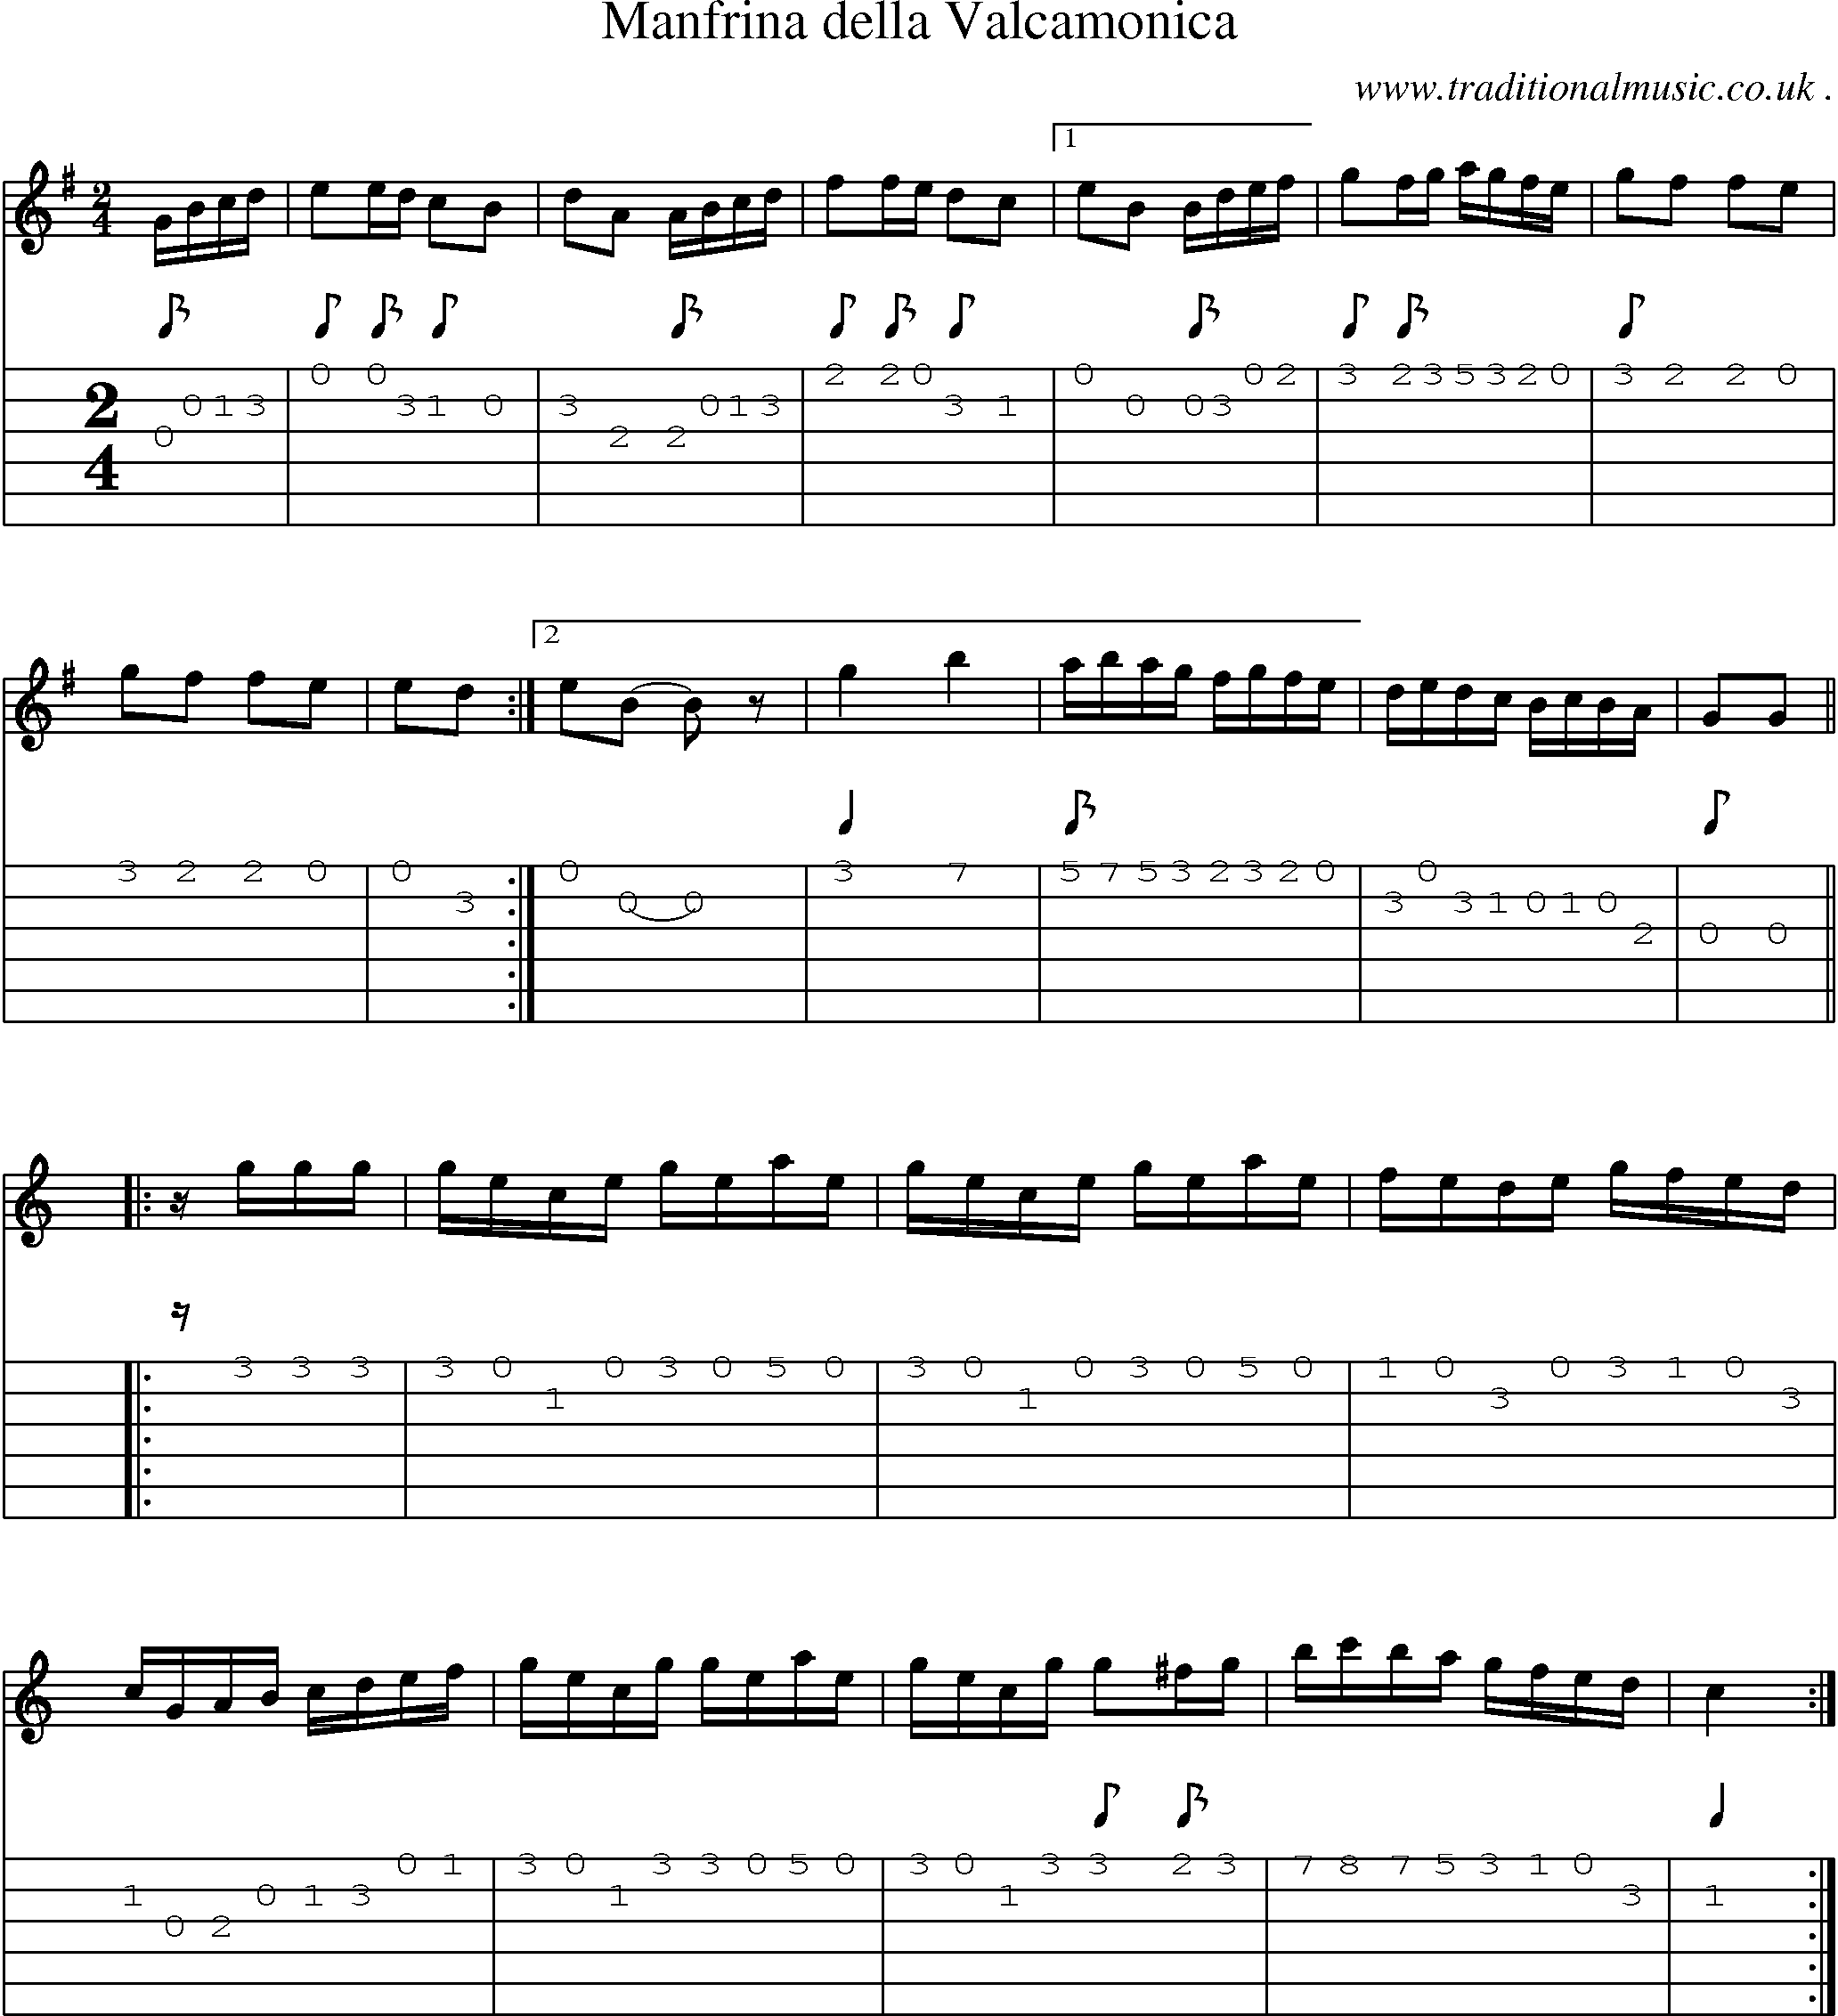 Sheet-Music and Guitar Tabs for Manfrina Della Valcamonica